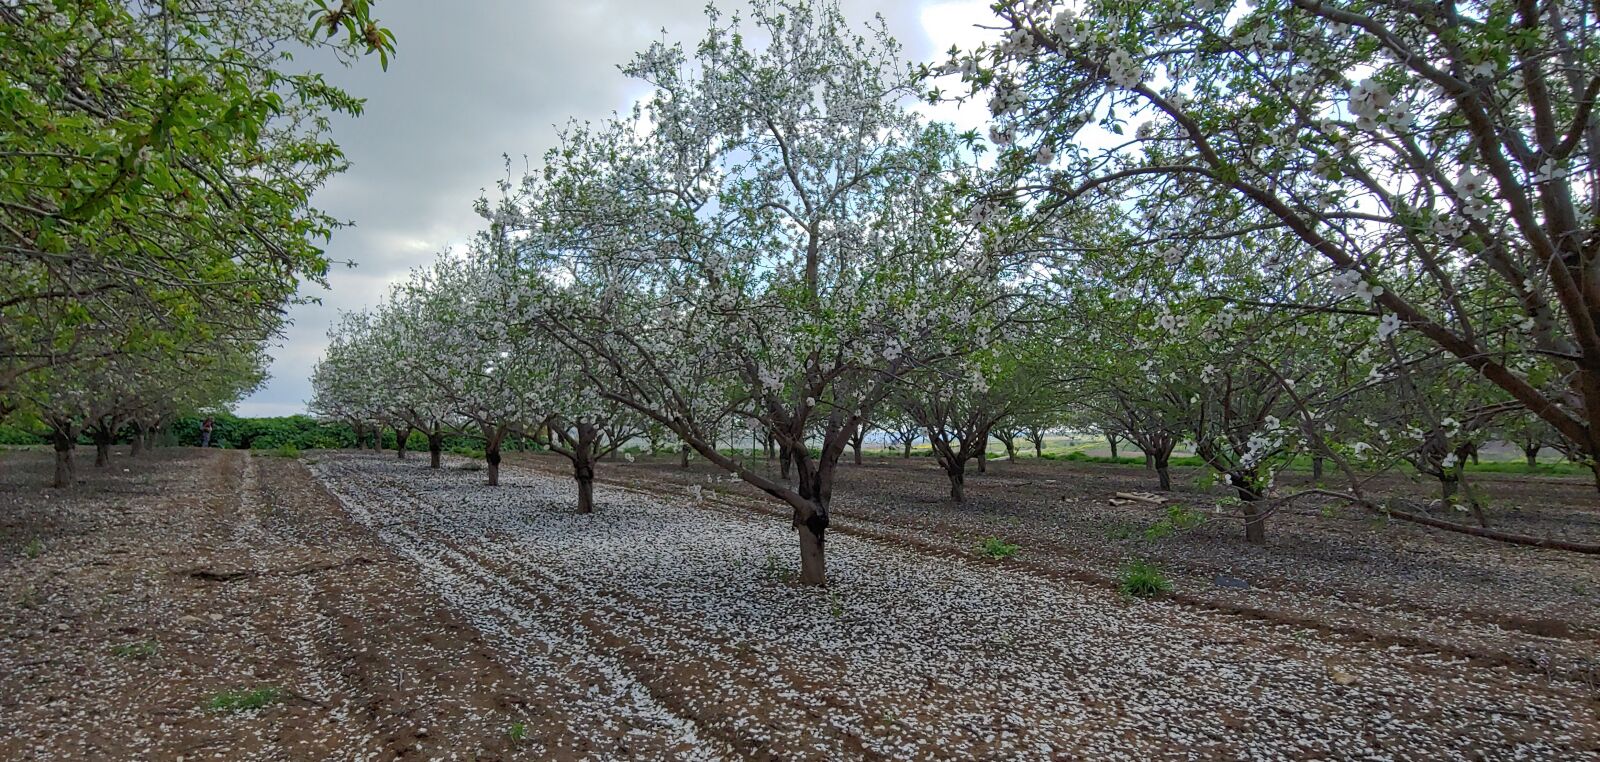 LG G7 THINQ sample photo. Almond tree, spring, nature photography